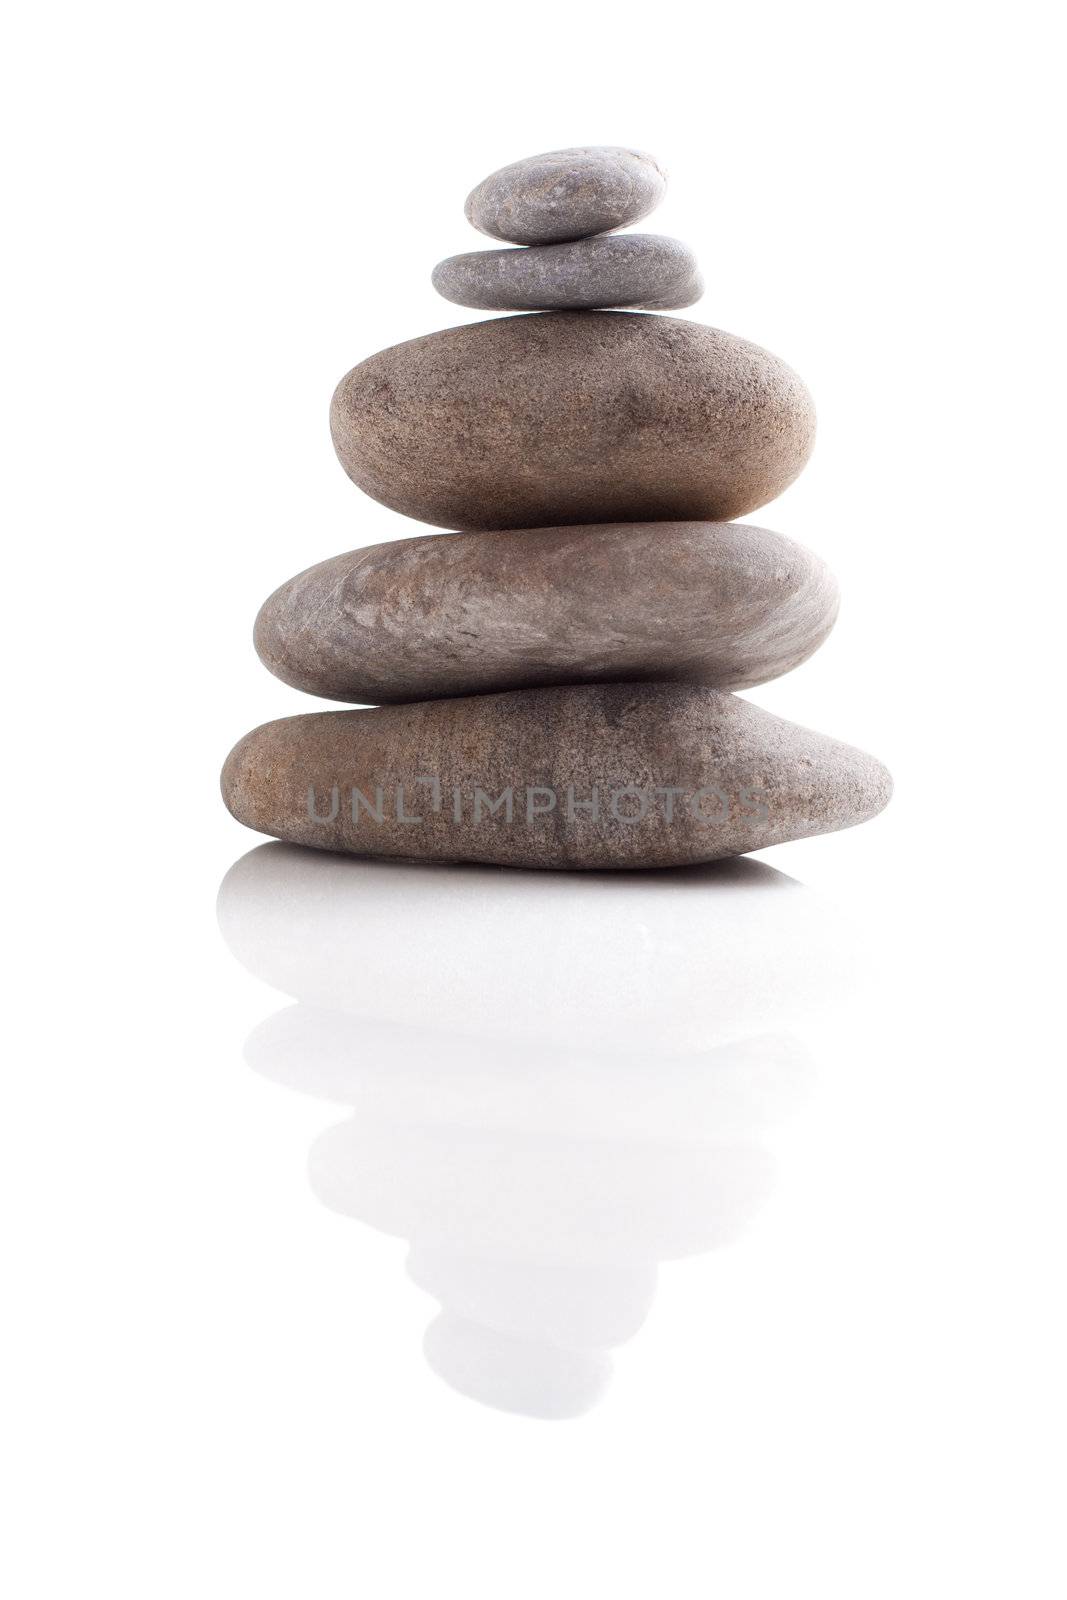 Massage Stones by azschach